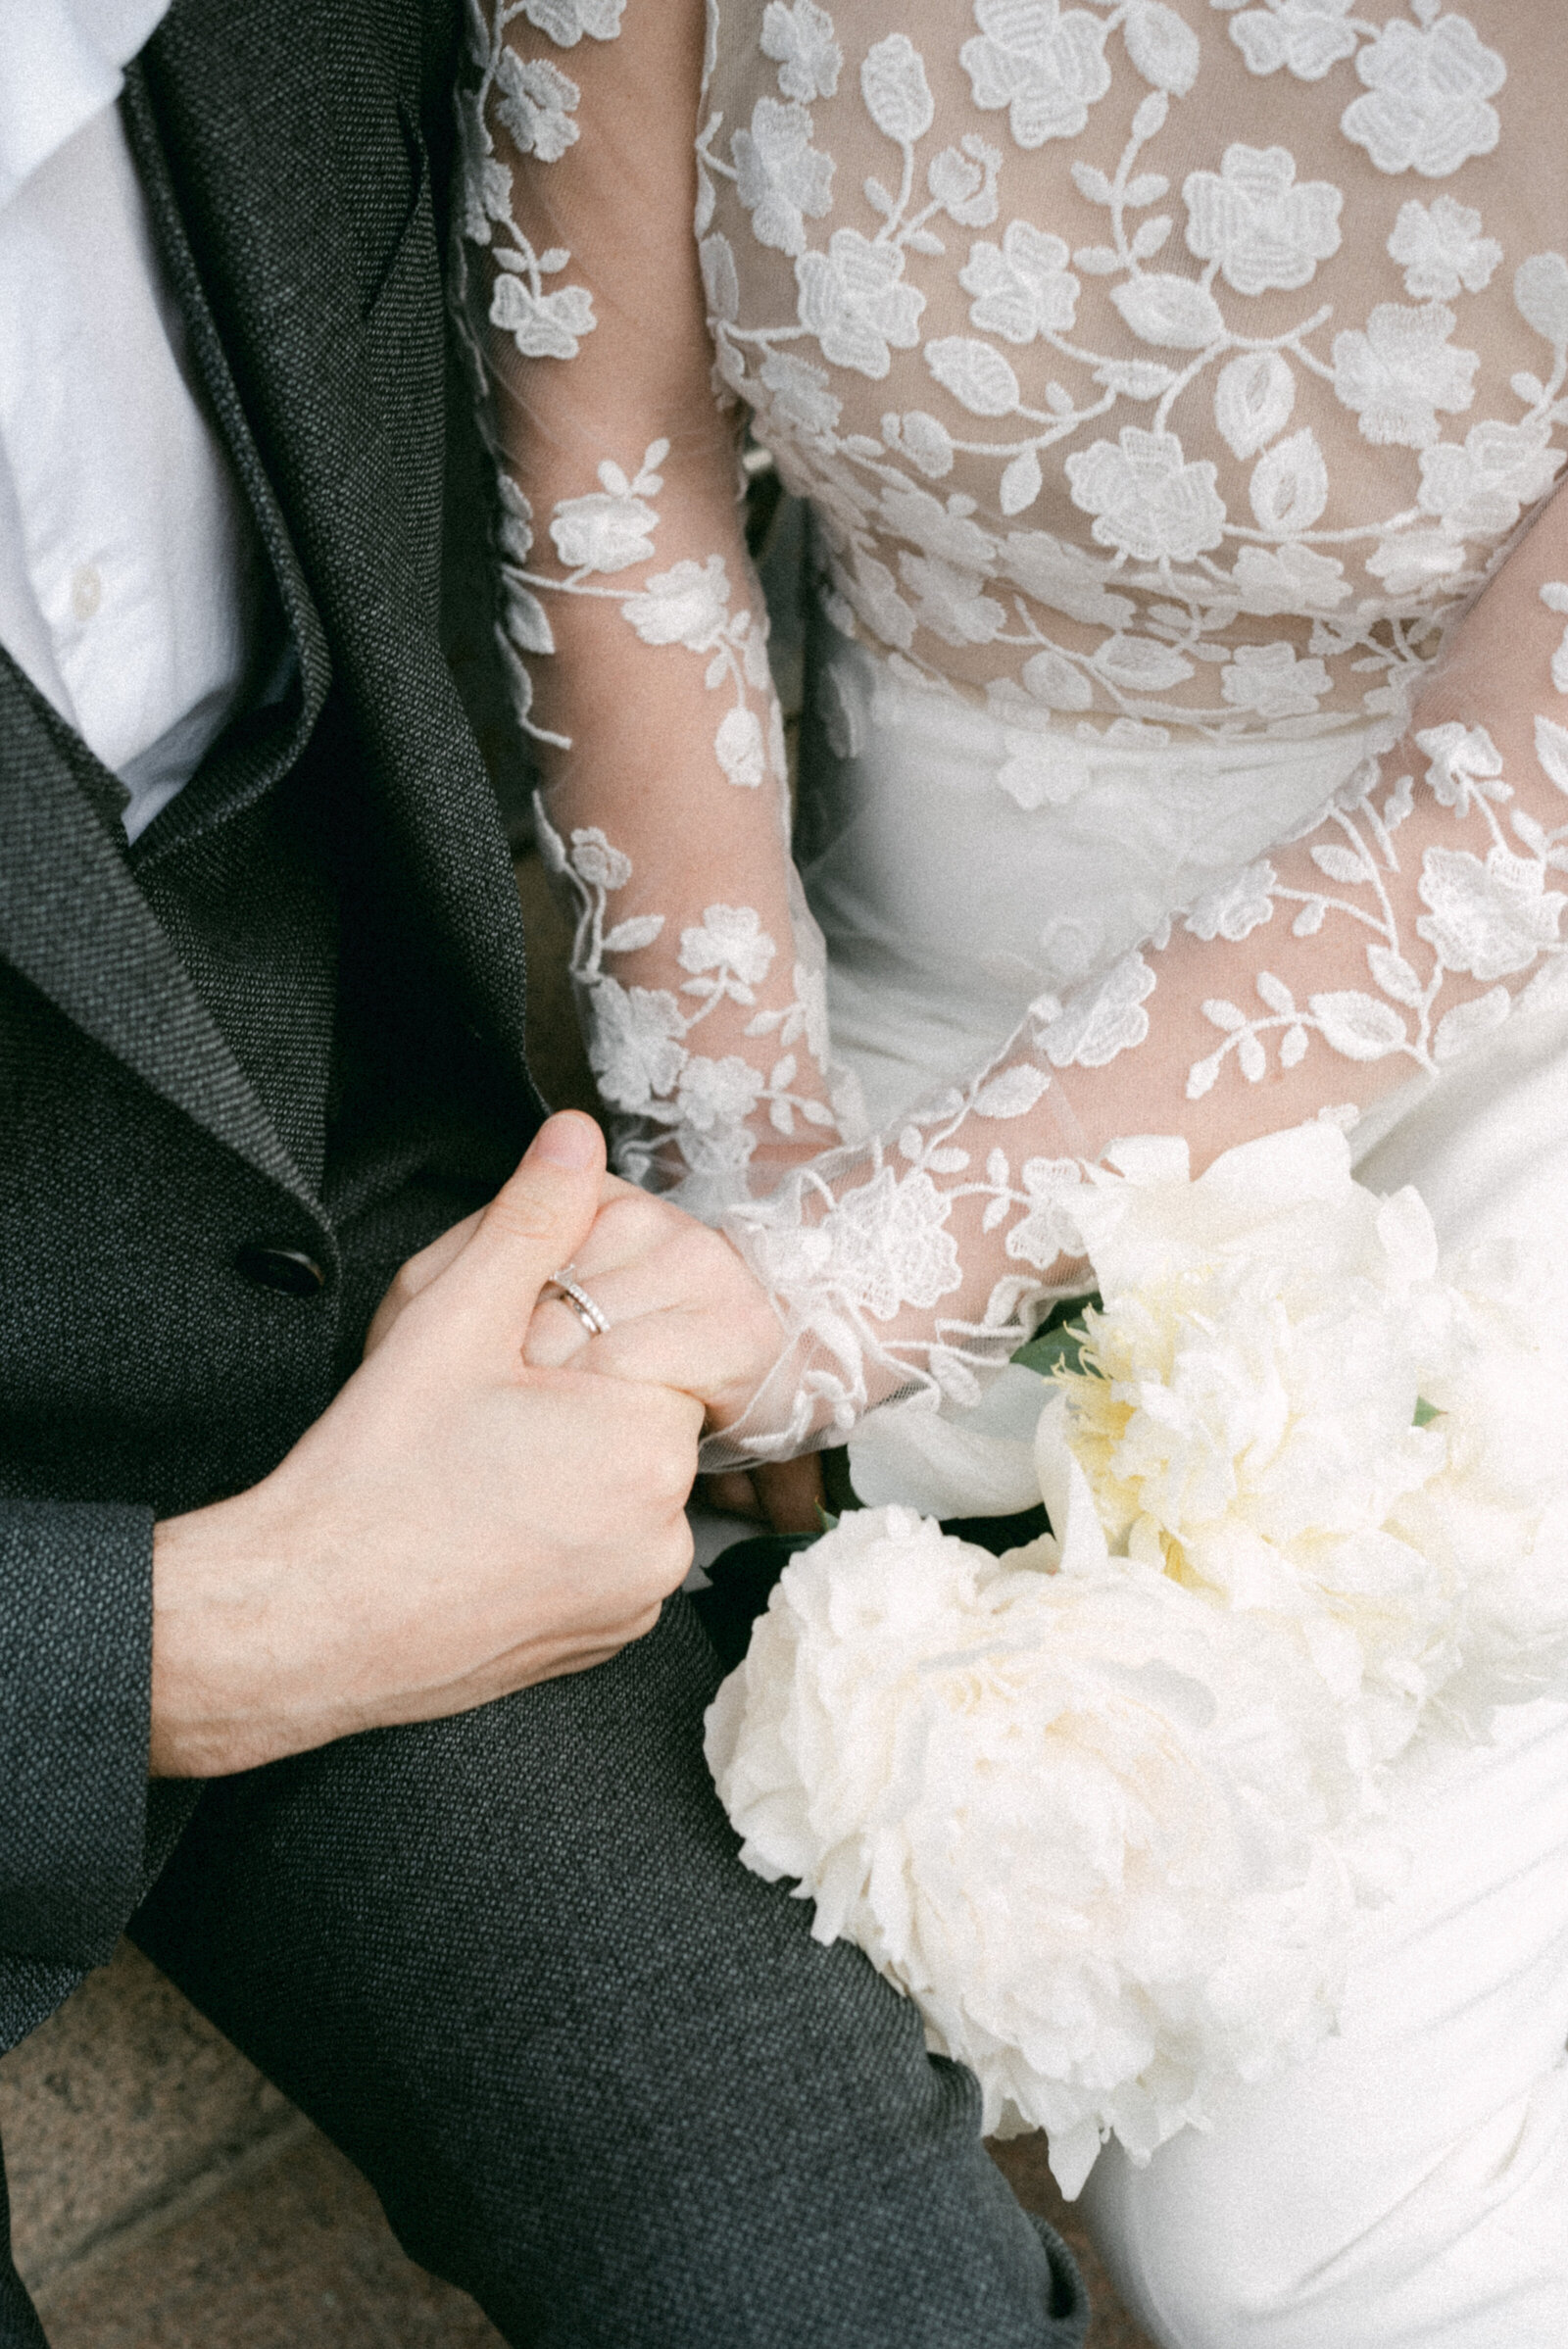 Detail image of a wedding couple holding hands. The bride has a bouquet of white peonies on her lap. Image by the wedding photographer Hannika Gabrielsson.